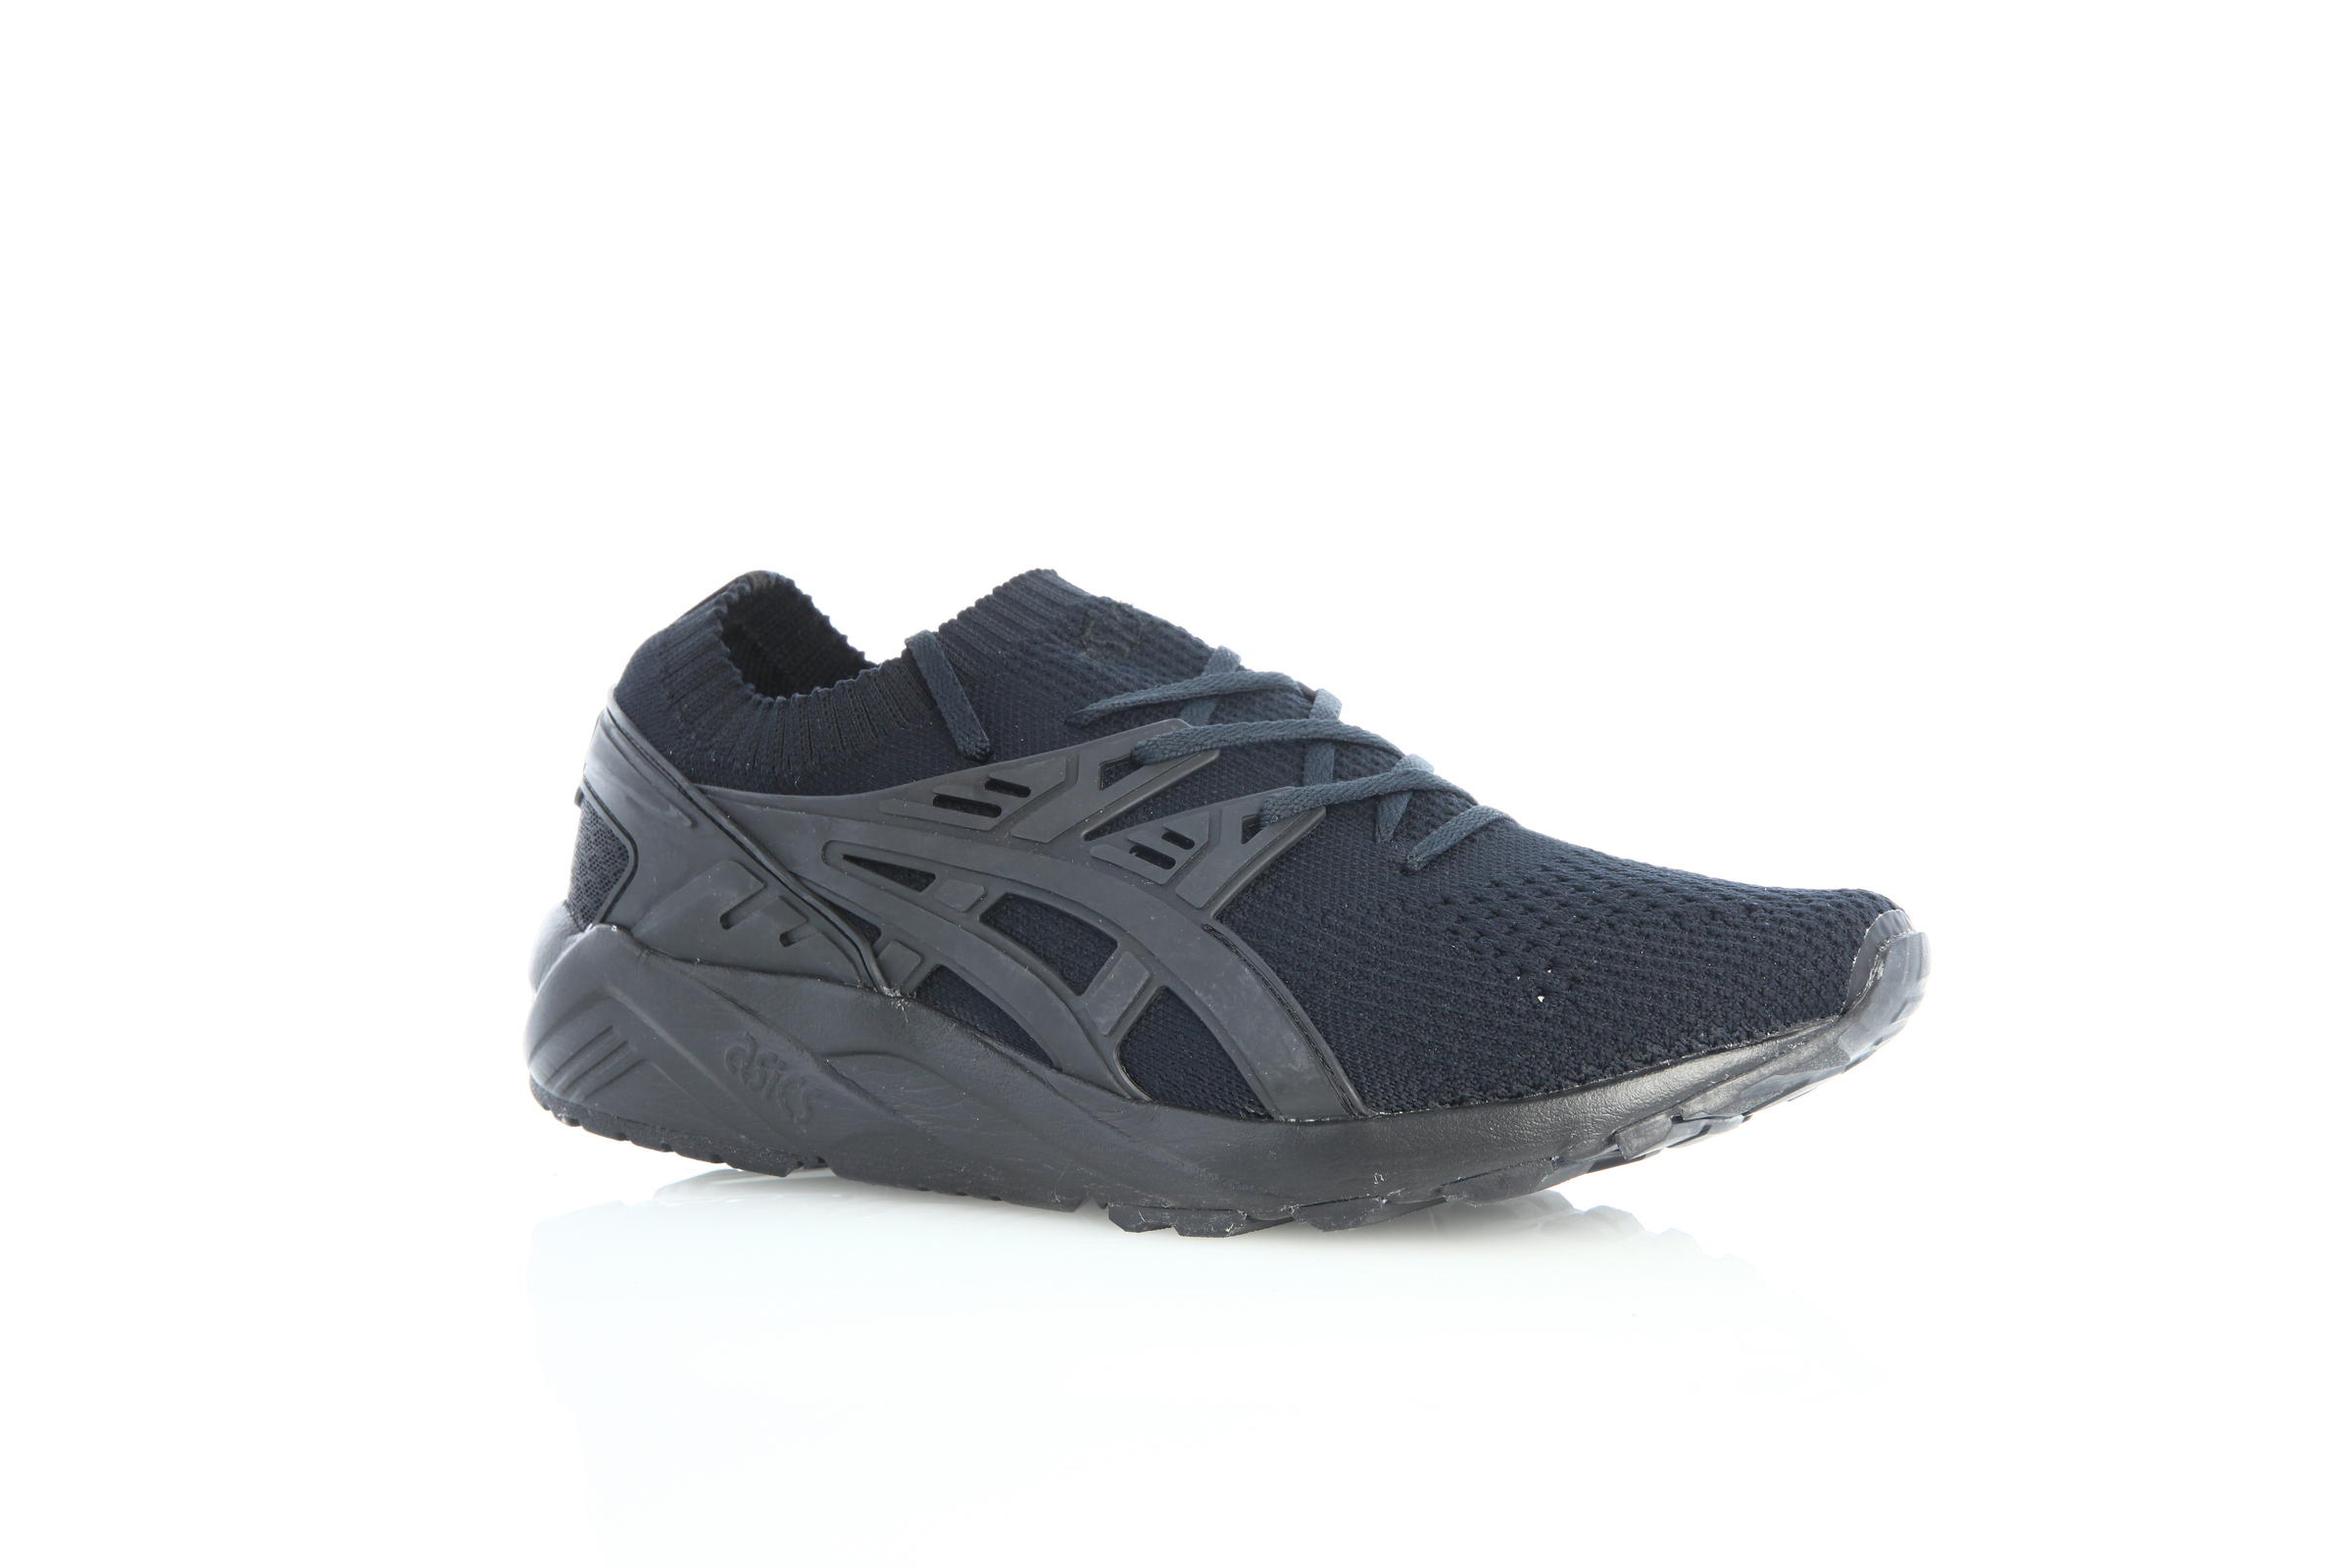 Asics Gel-Kayano Trainer One Piece Knit Pack "All Black"